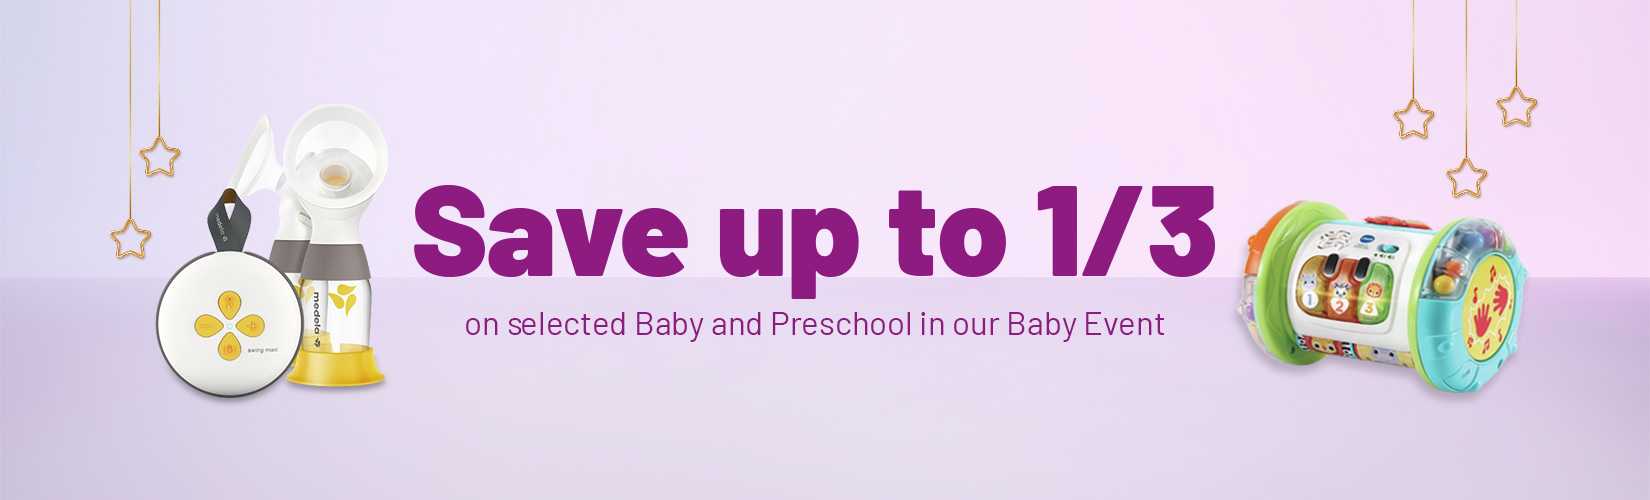 Save up to 1/3 on selected Baby and Preschool in our Baby event.